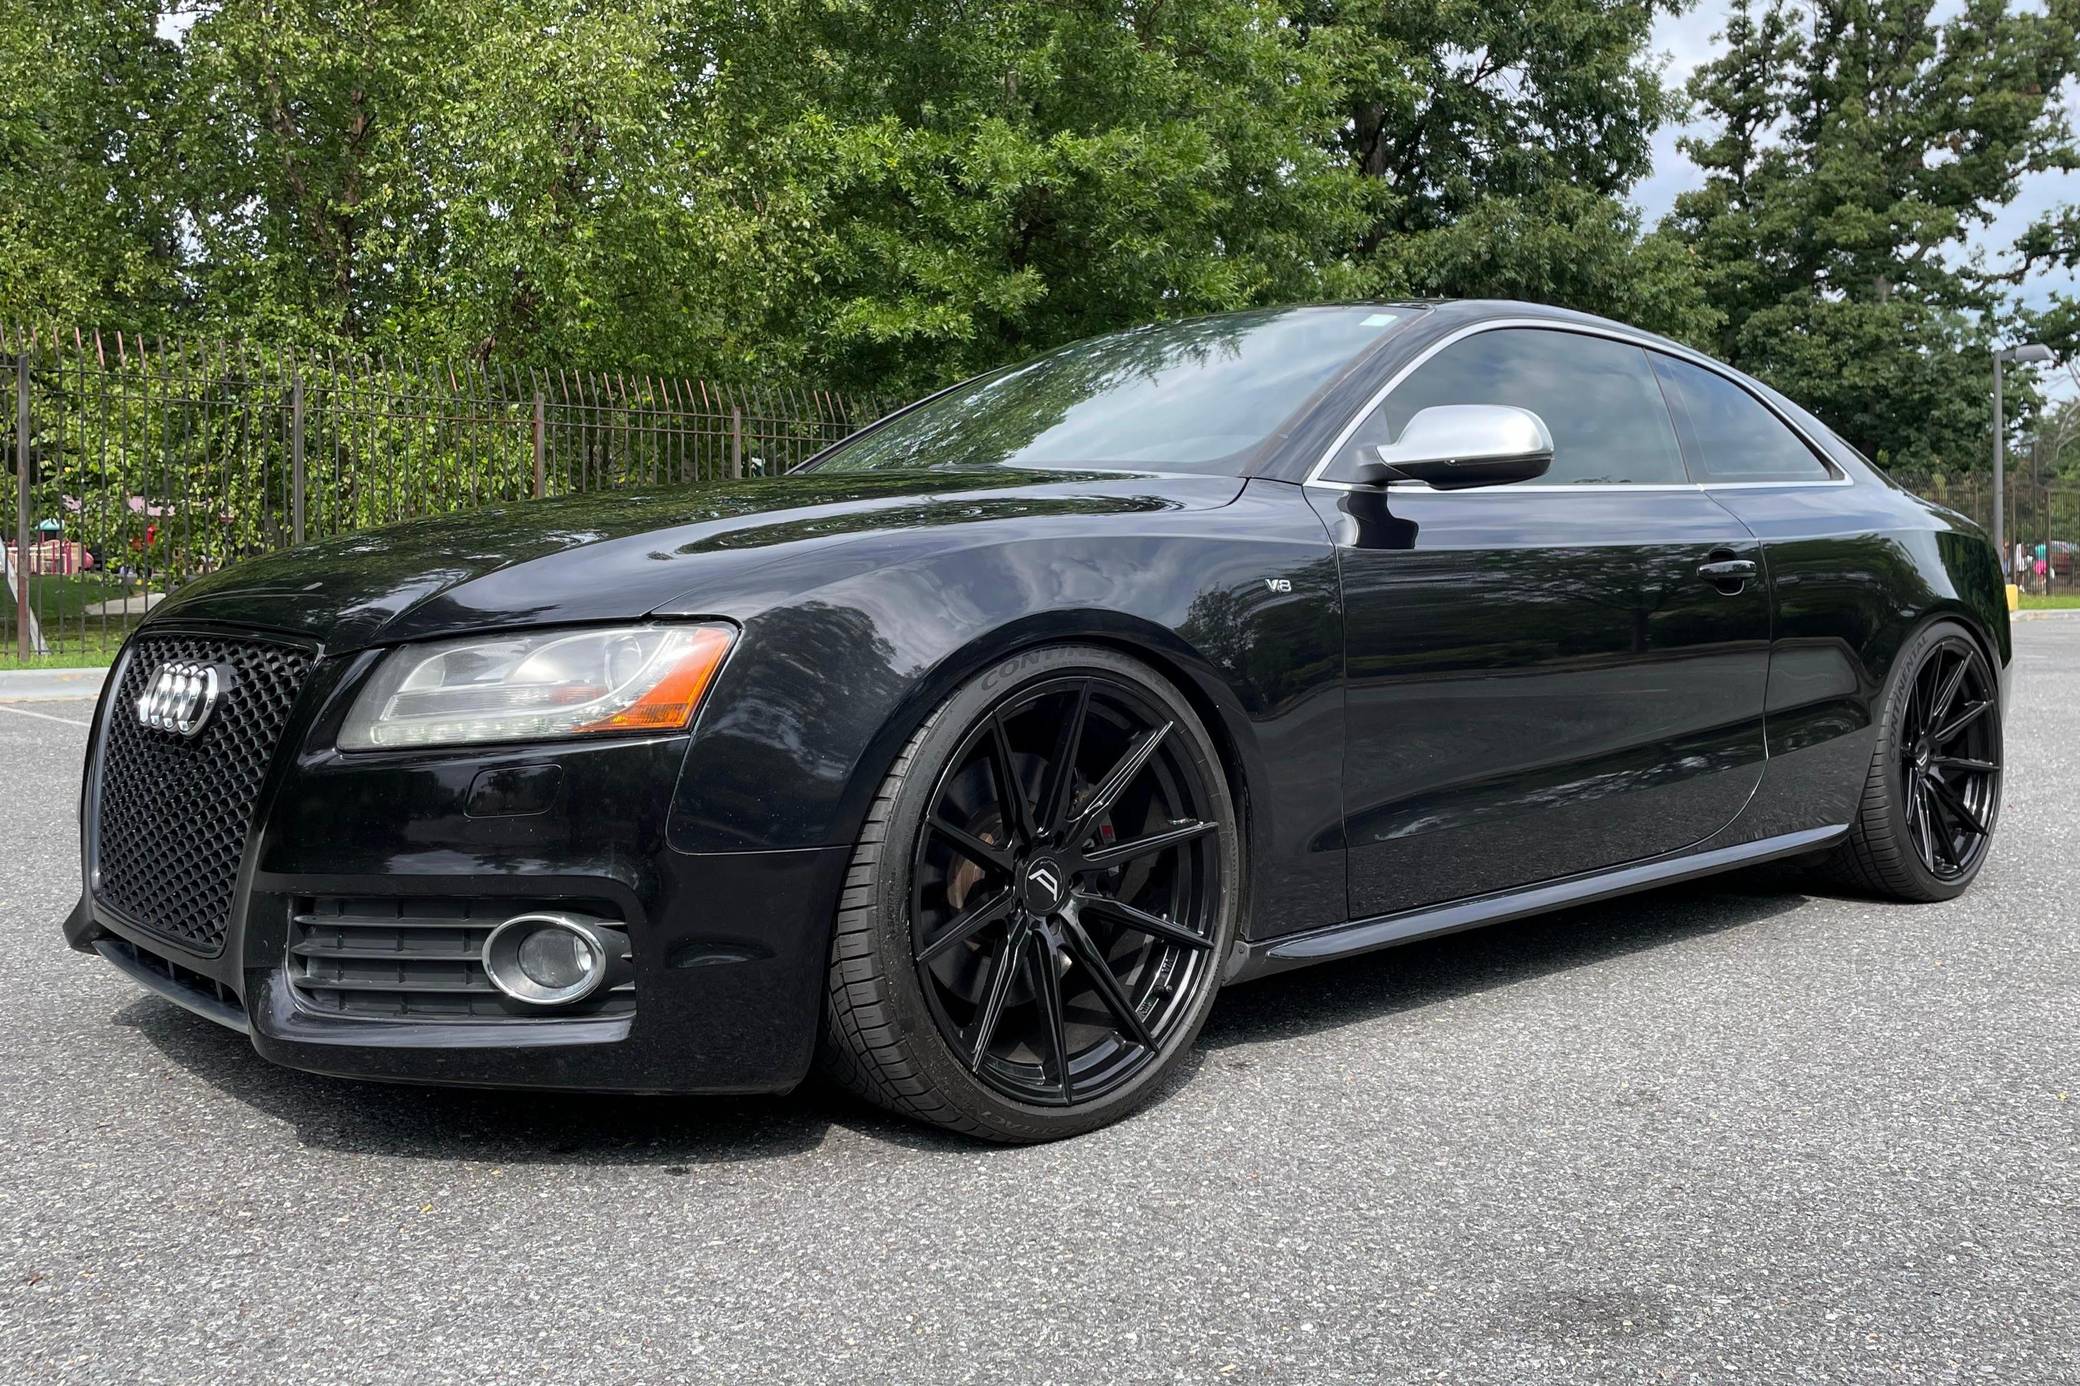 AUDI A5 audi-a5-b8-s-line-sport-edition-airride Used - the parking